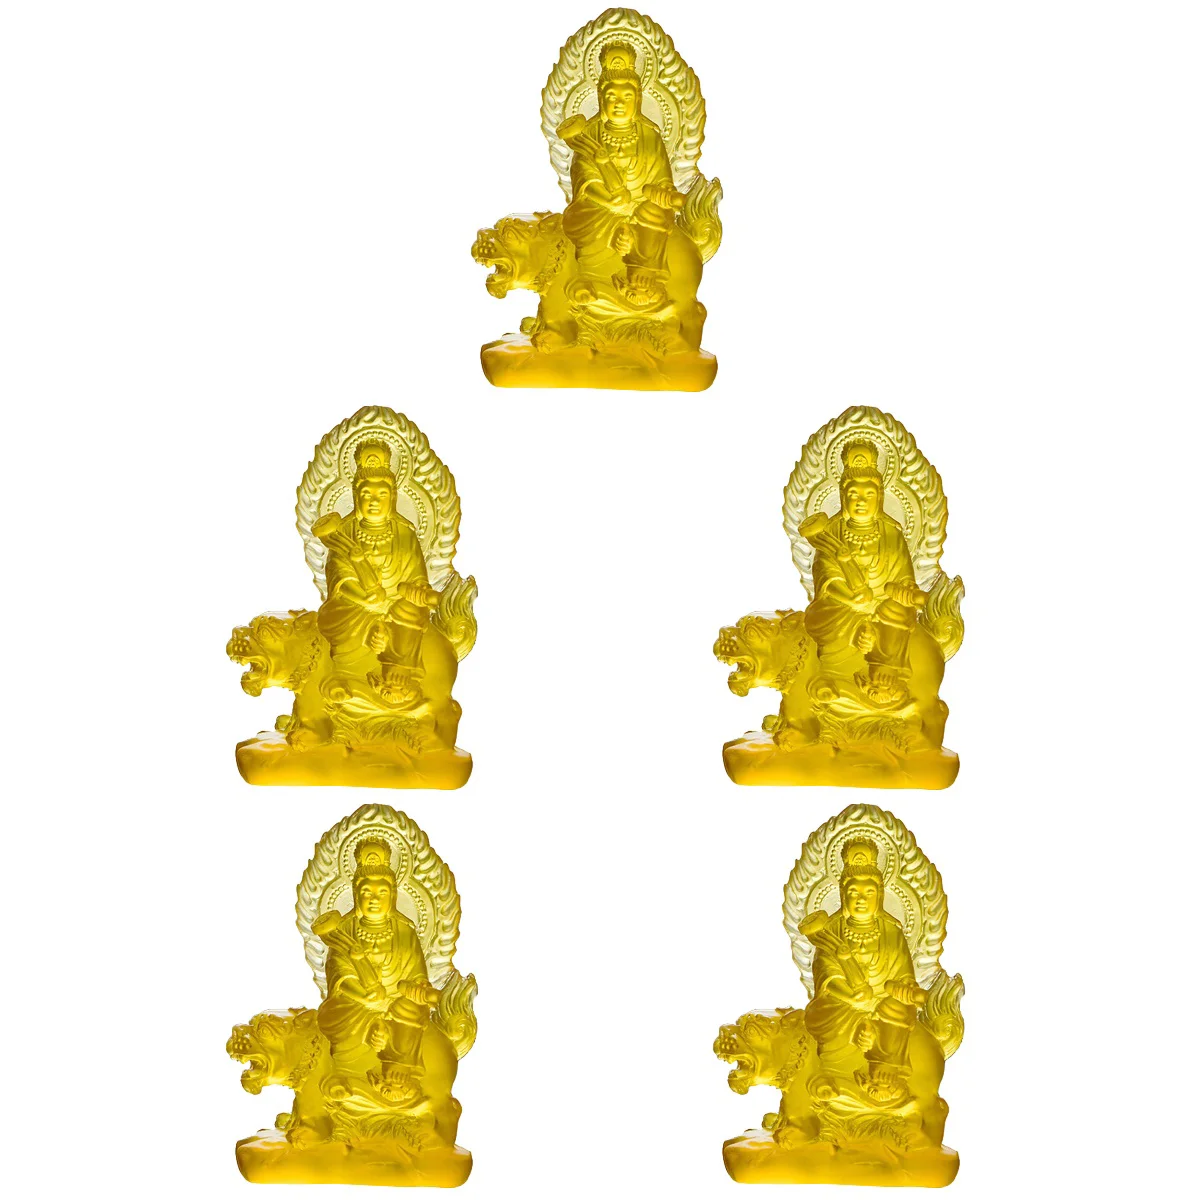 5x Figurine For Home Home Office Temple Figurine Home Decor Exquisite Craft Resin Craft for Office Bedroom